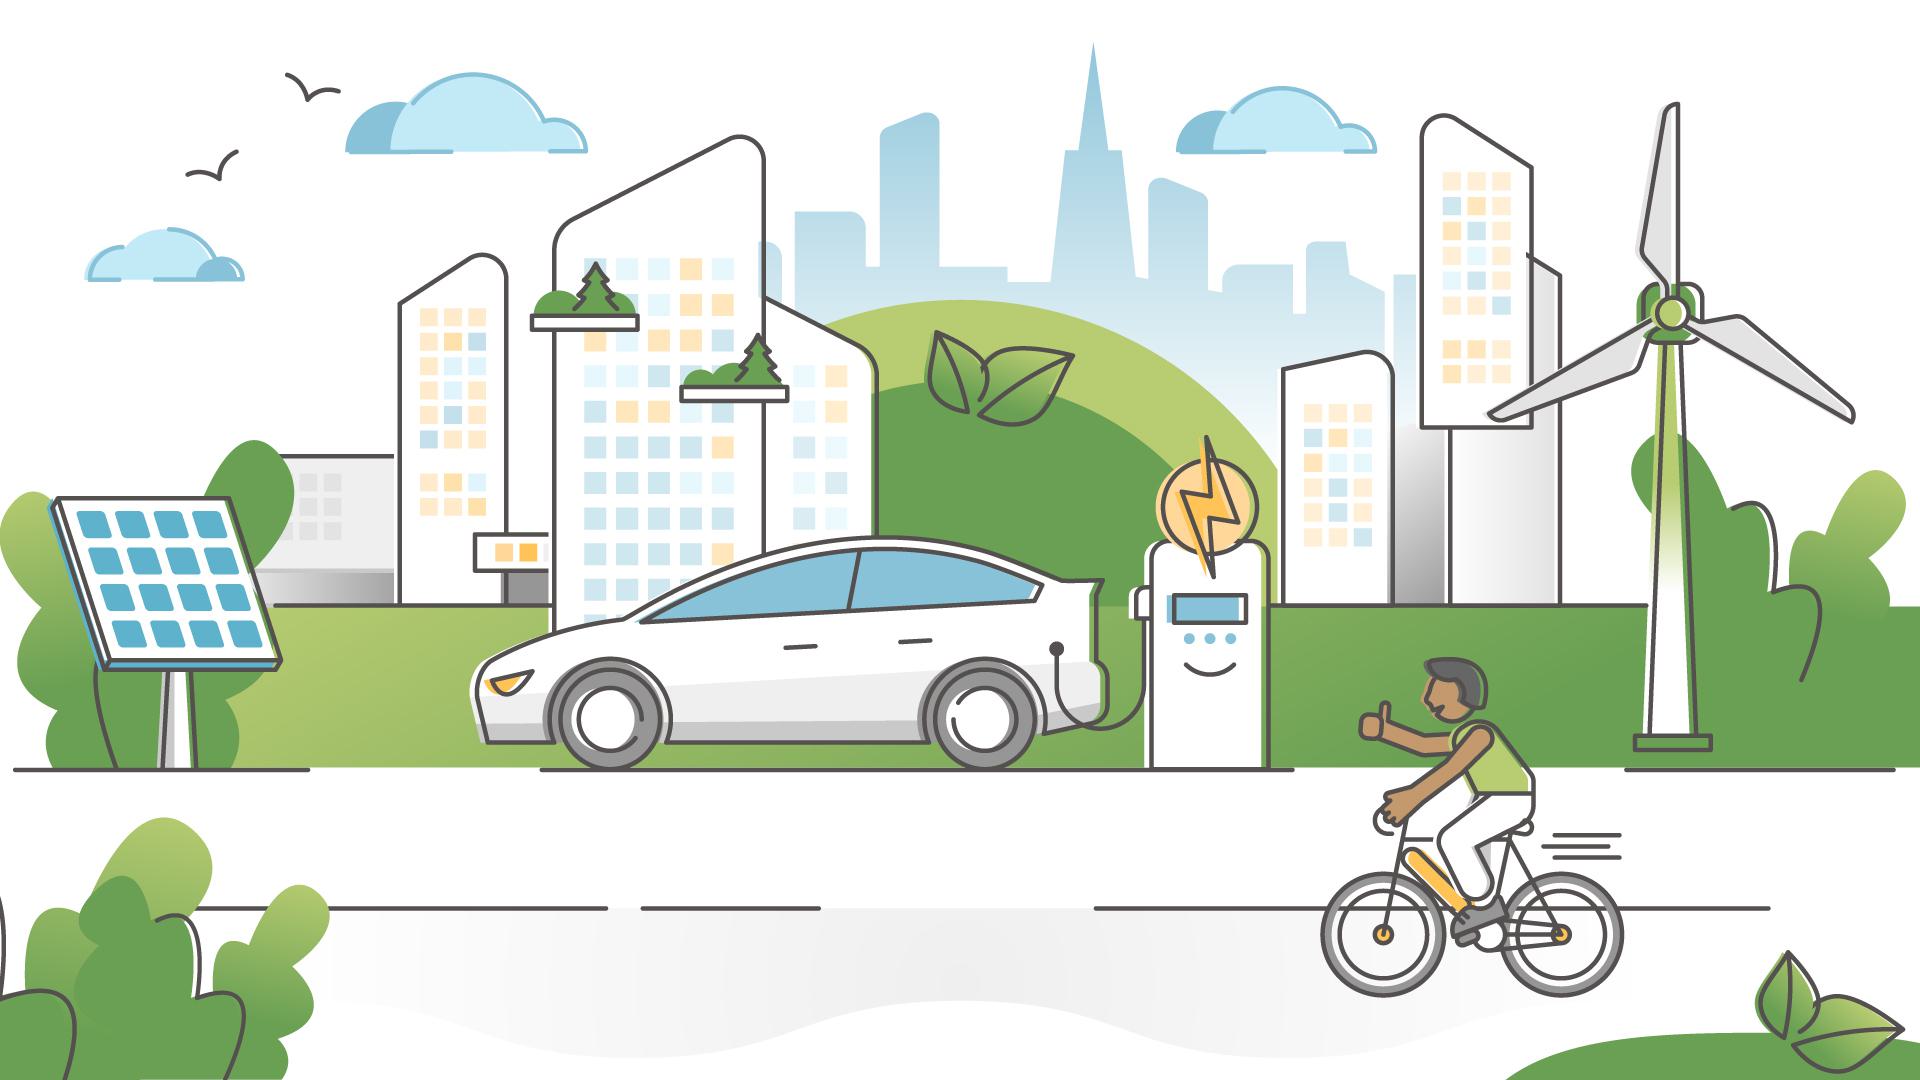 Illustration of car charging in a city with bikers and solar panels surrounding it